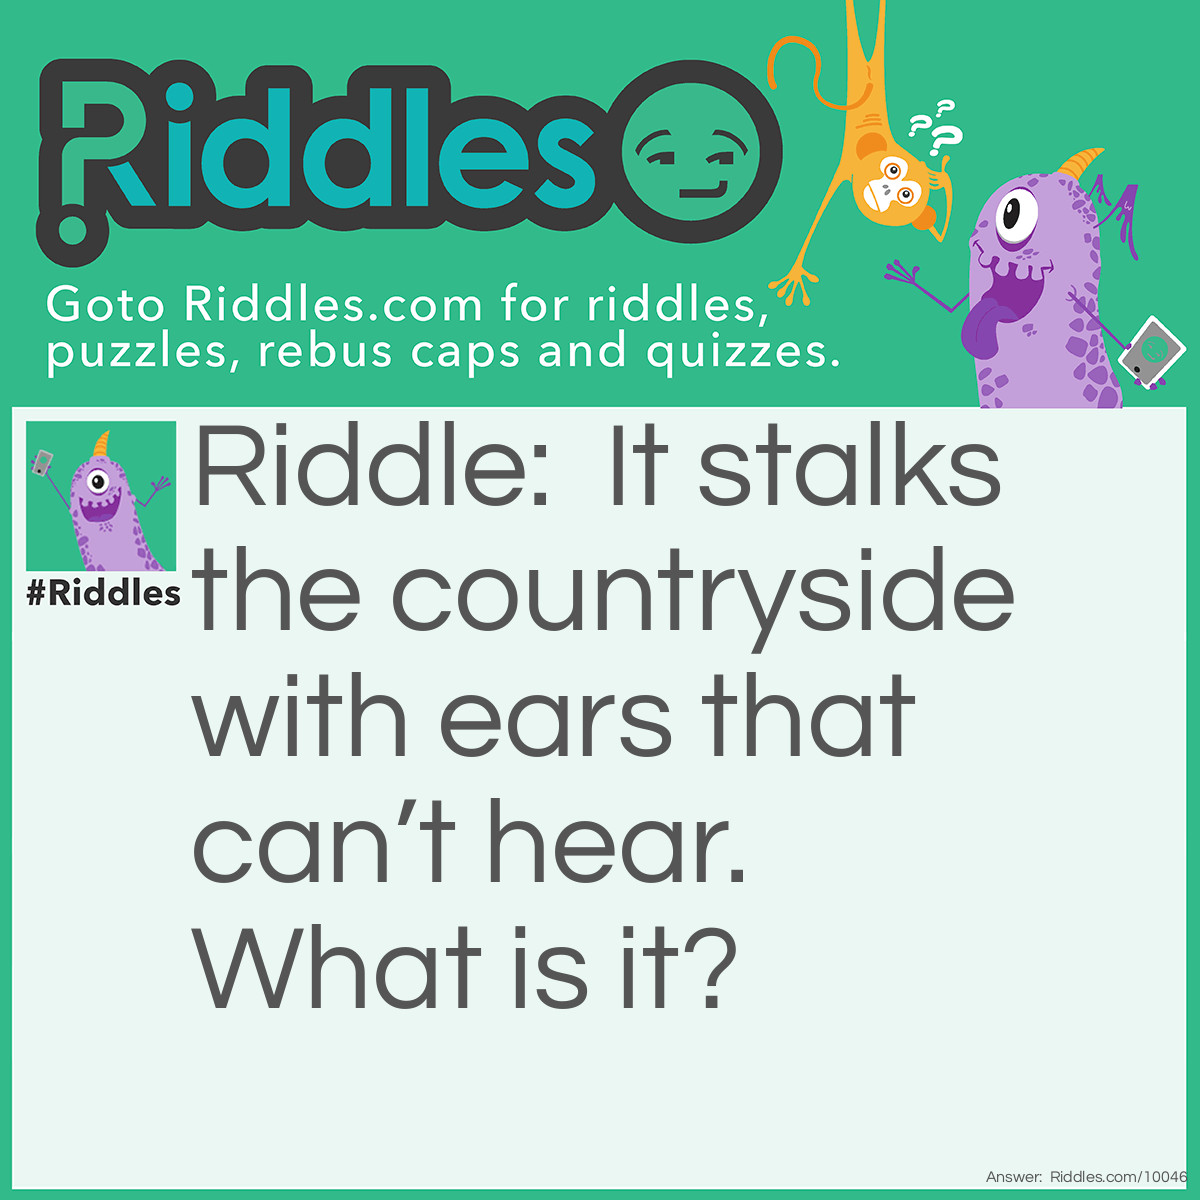 Riddle: It stalks the countryside with ears that can't hear. What is it? Answer: Corn.